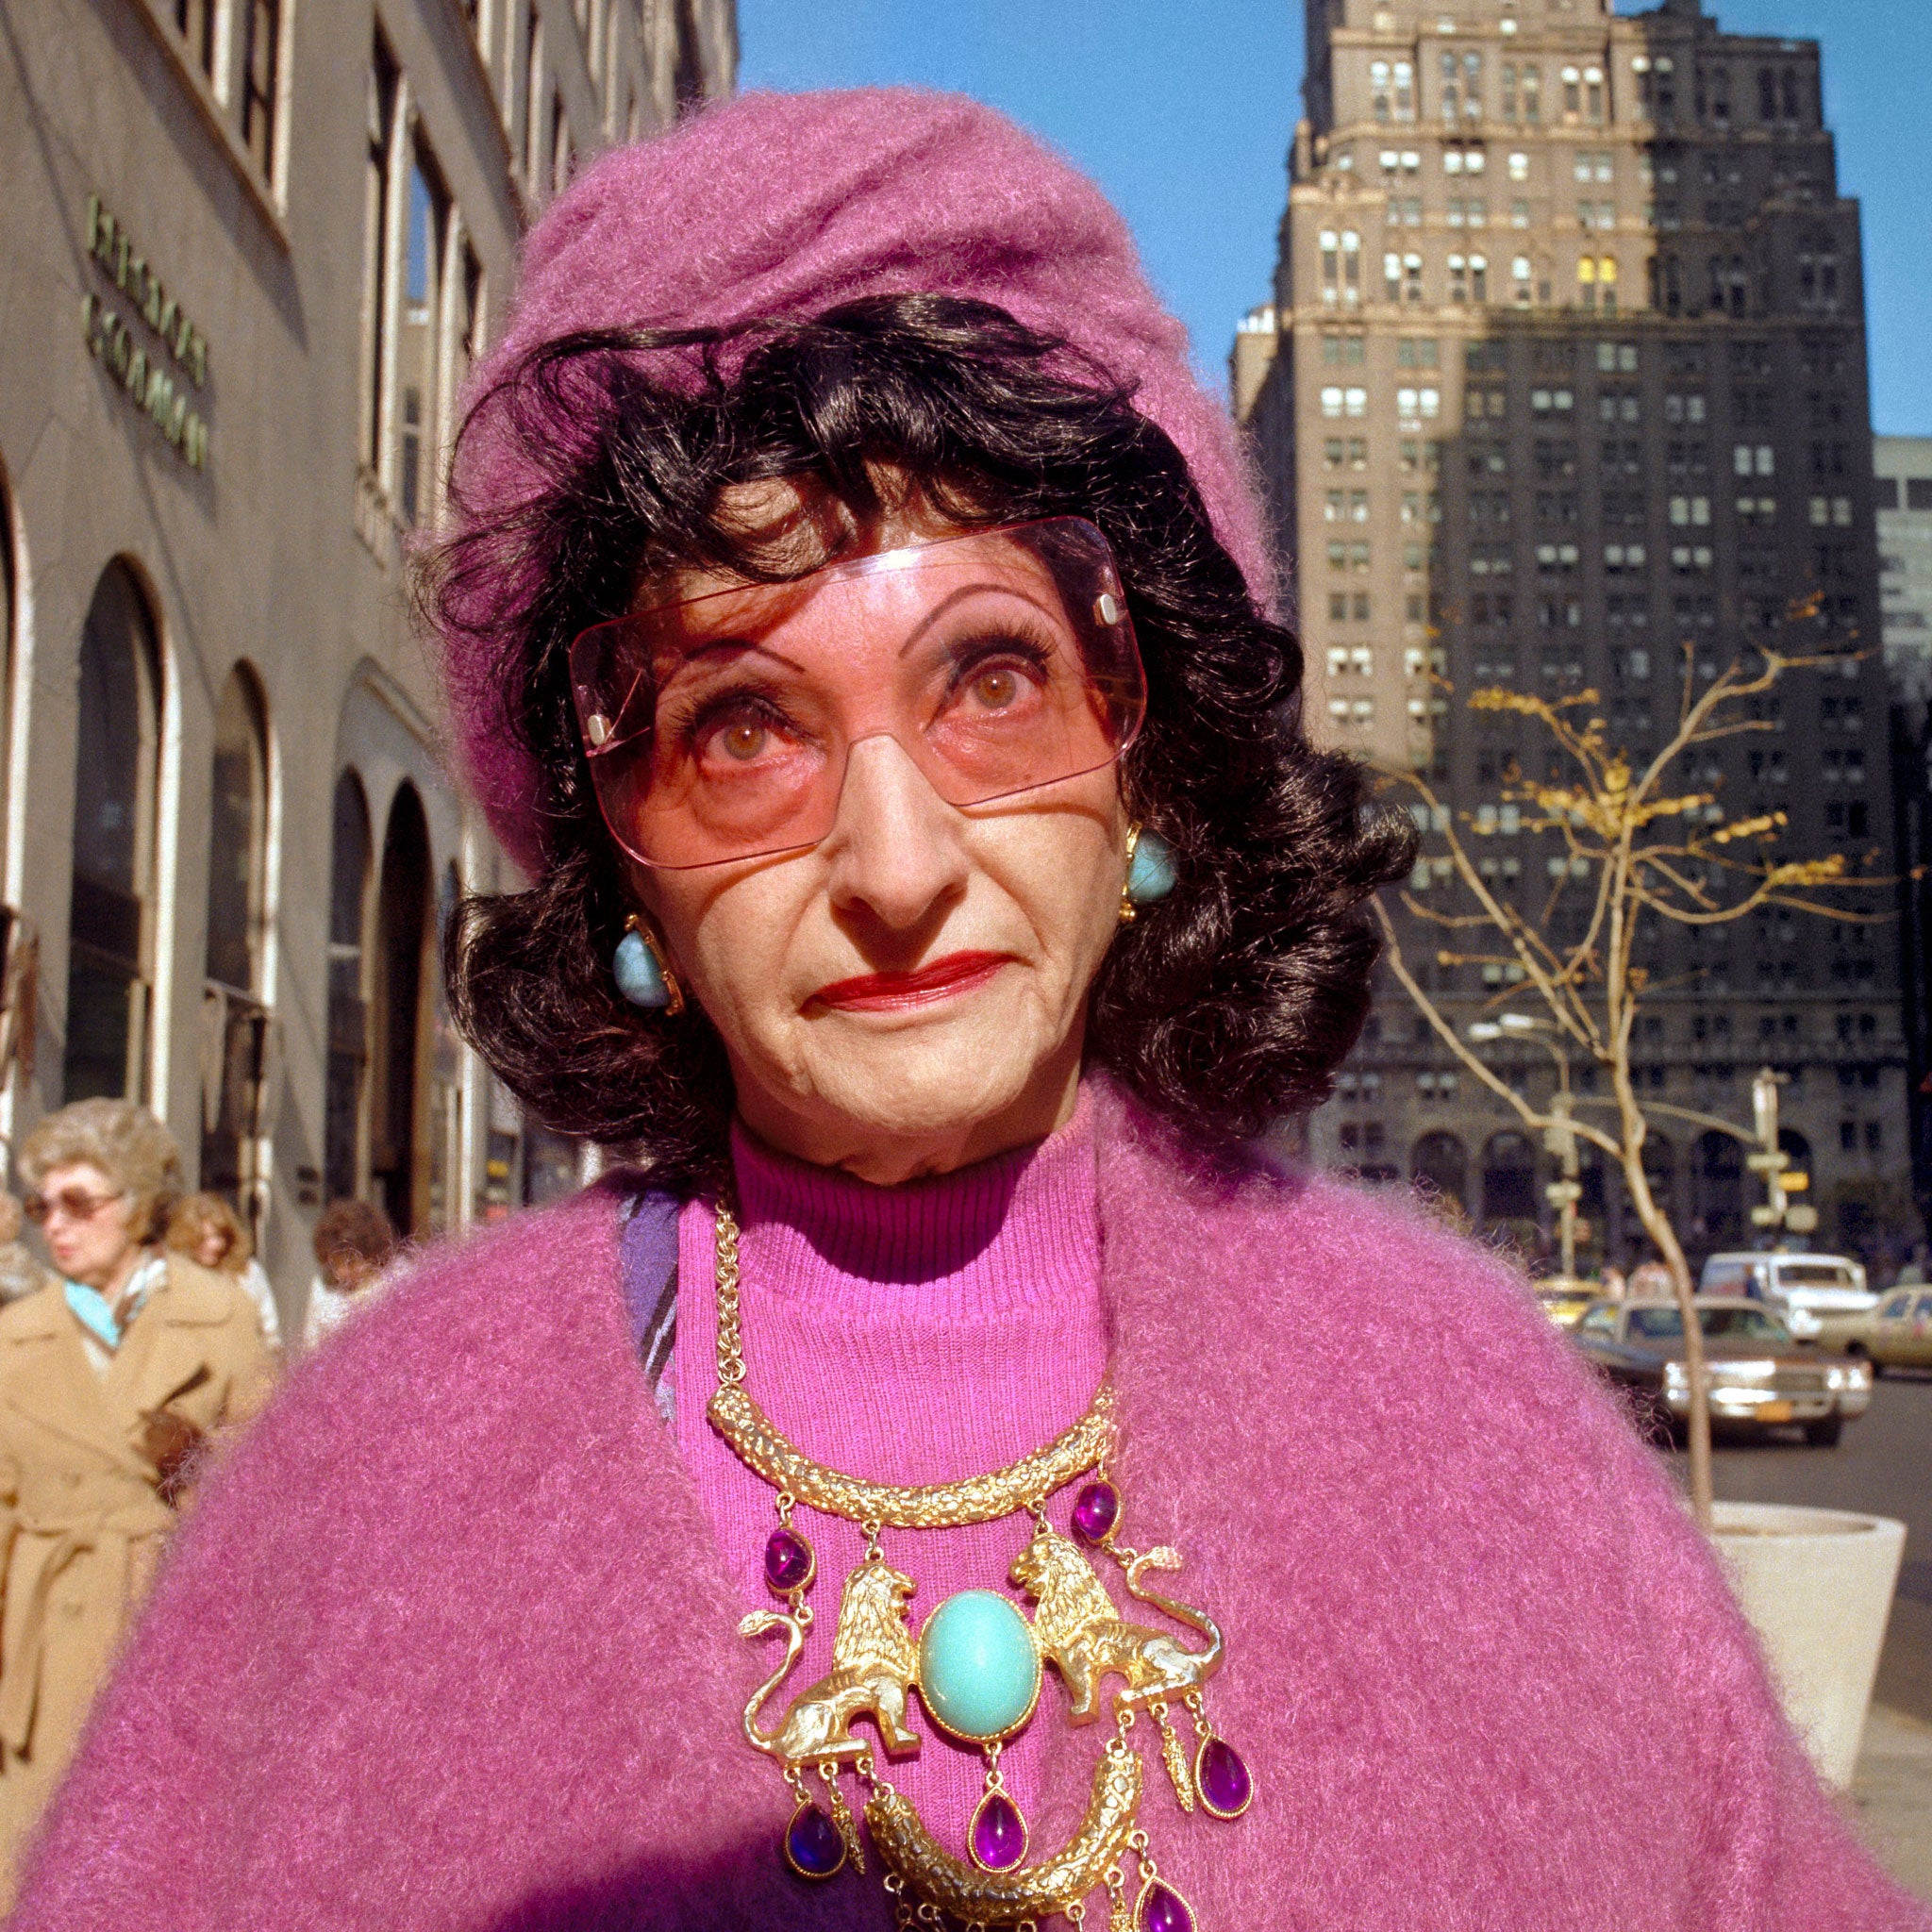 Lunchtime is a comprehensive collection of shots Traub took between 1977 and 1980 in Chicago and New York